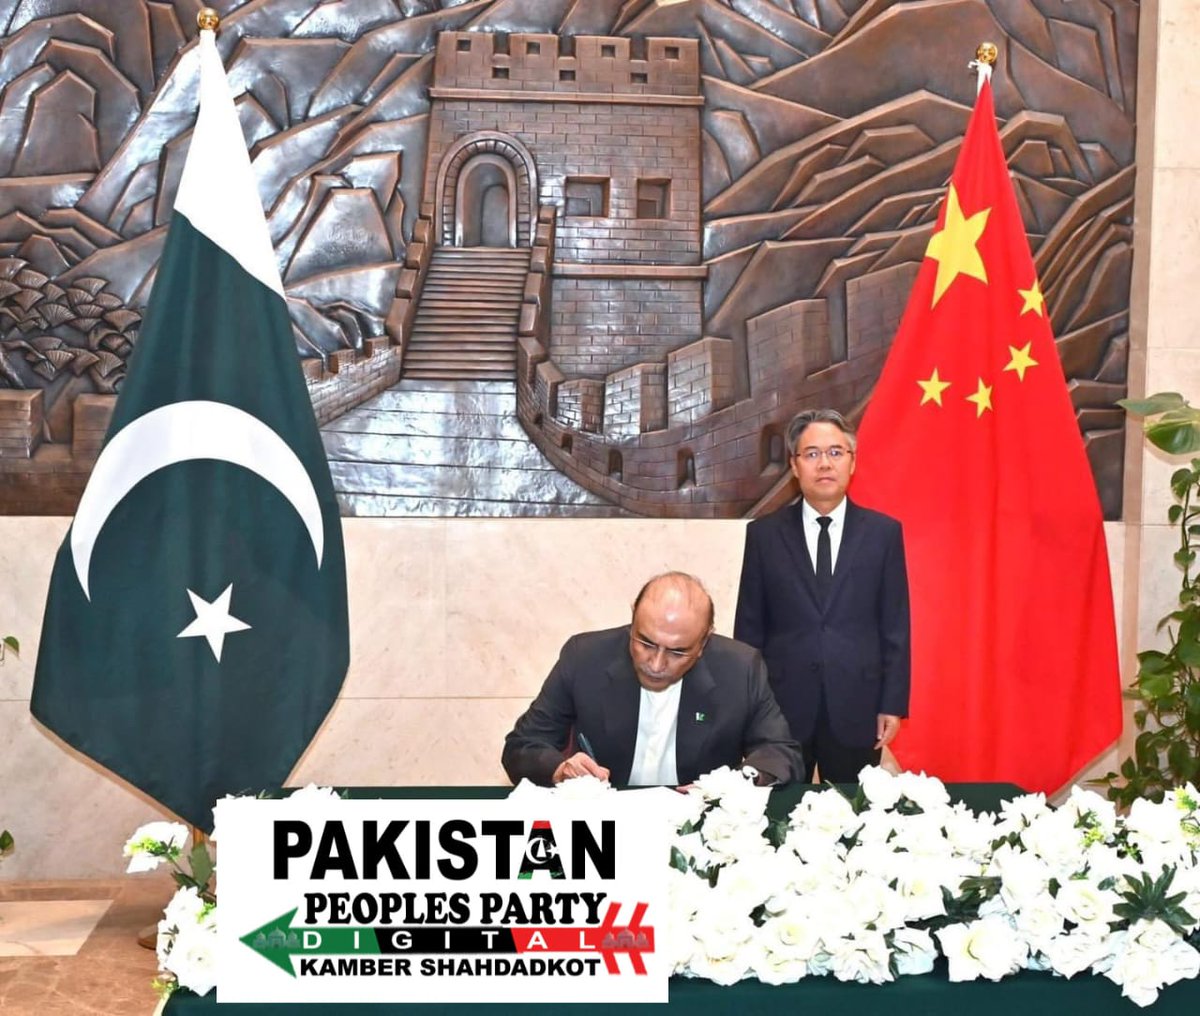 That's a heartfelt gesture by President Asif Ali Zardari, offering his condolences at the Chinese Embassy in Islamabad. 🙏 It's important to stand in solidarity during times of loss and show support to our friends. 🤝  #PakistanChina #PPPDigitalKSK